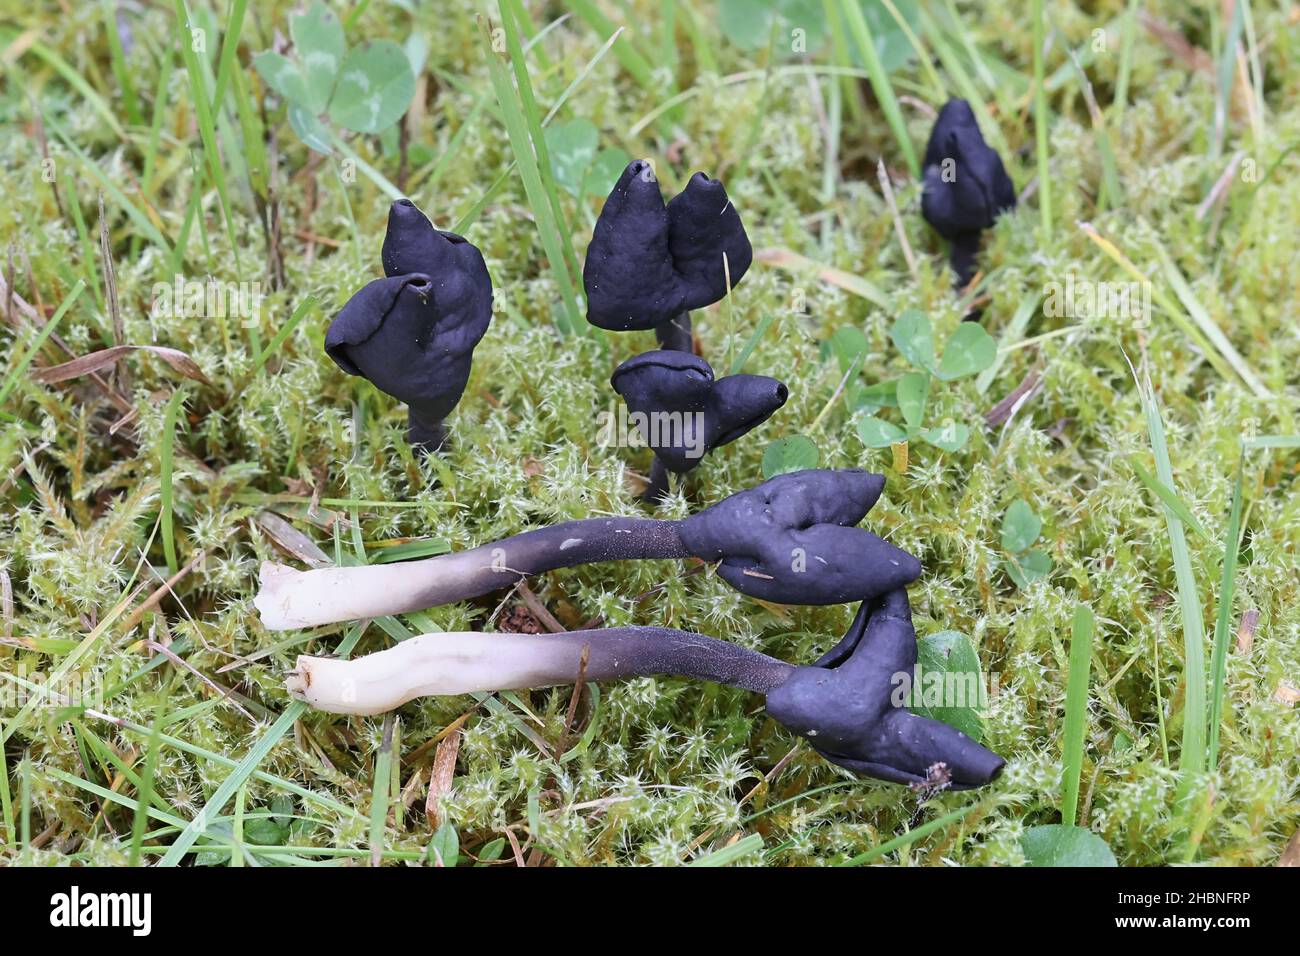 Helvella fallax, previously called Helvella atra, a saddle fungus from Finland with no common English name Stock Photo